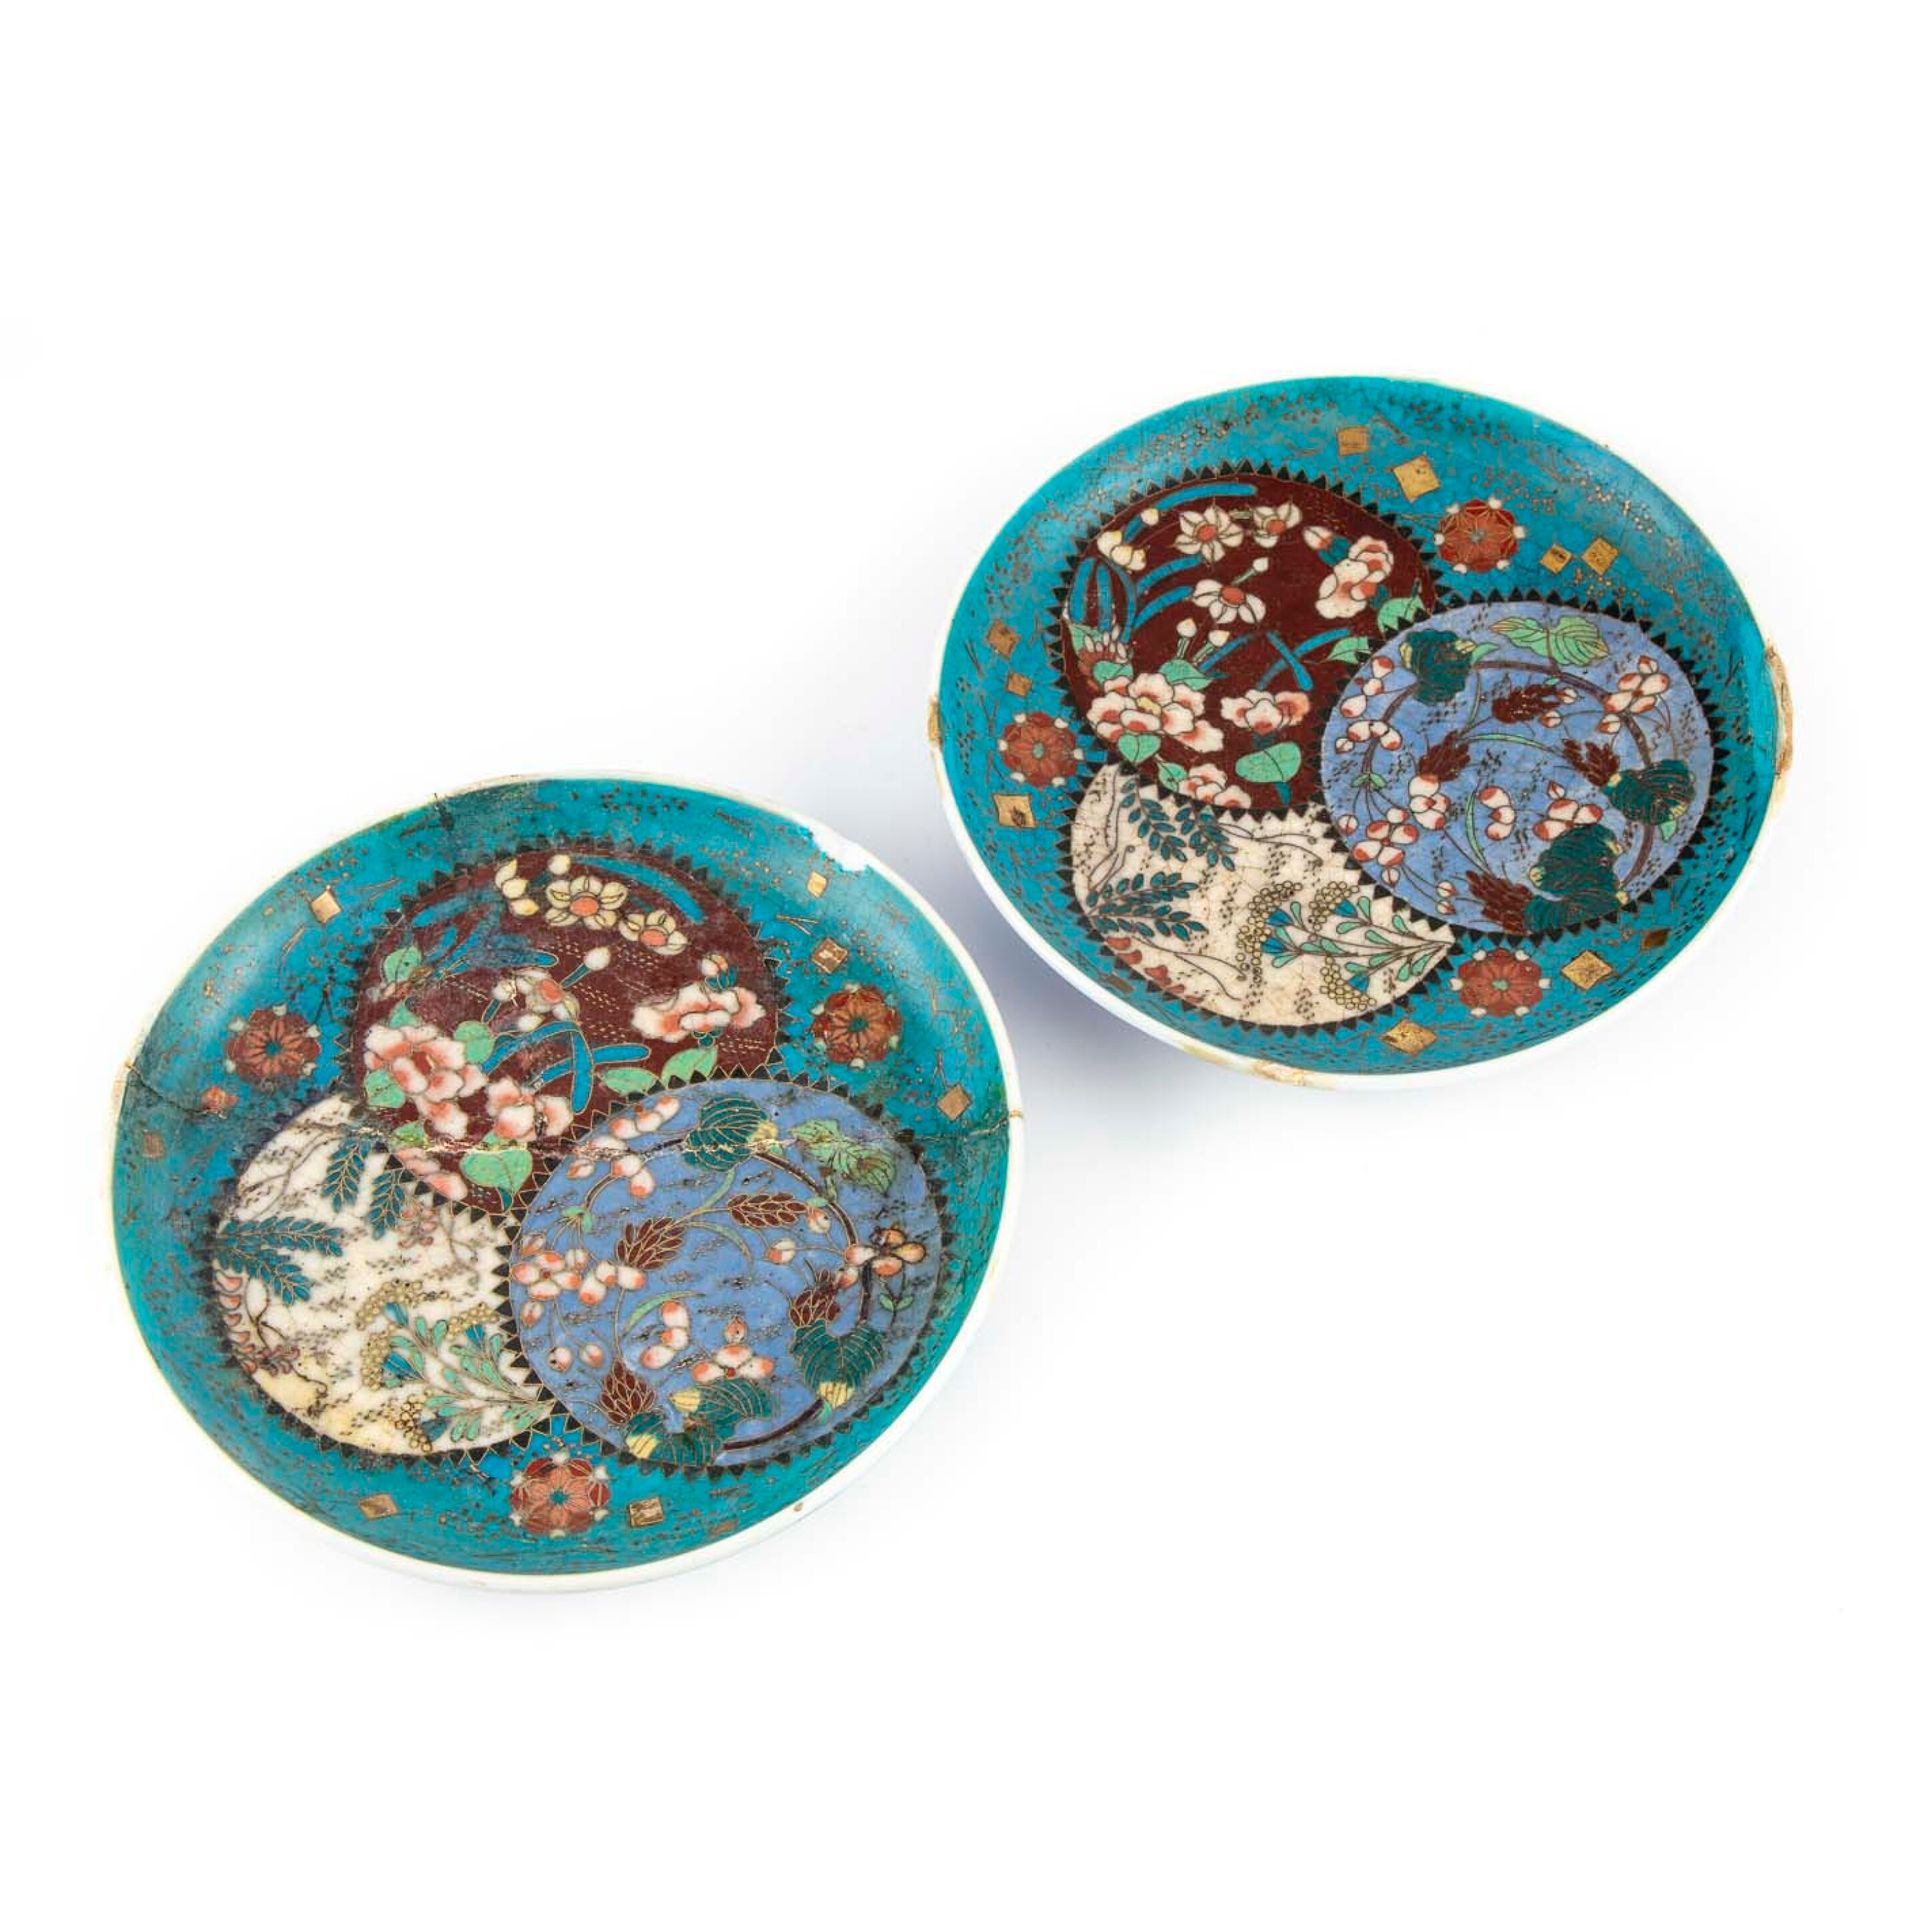 CHINE CHINA (?)

Pair of small porcelain plates with metal inlays in the cloison&hellip;